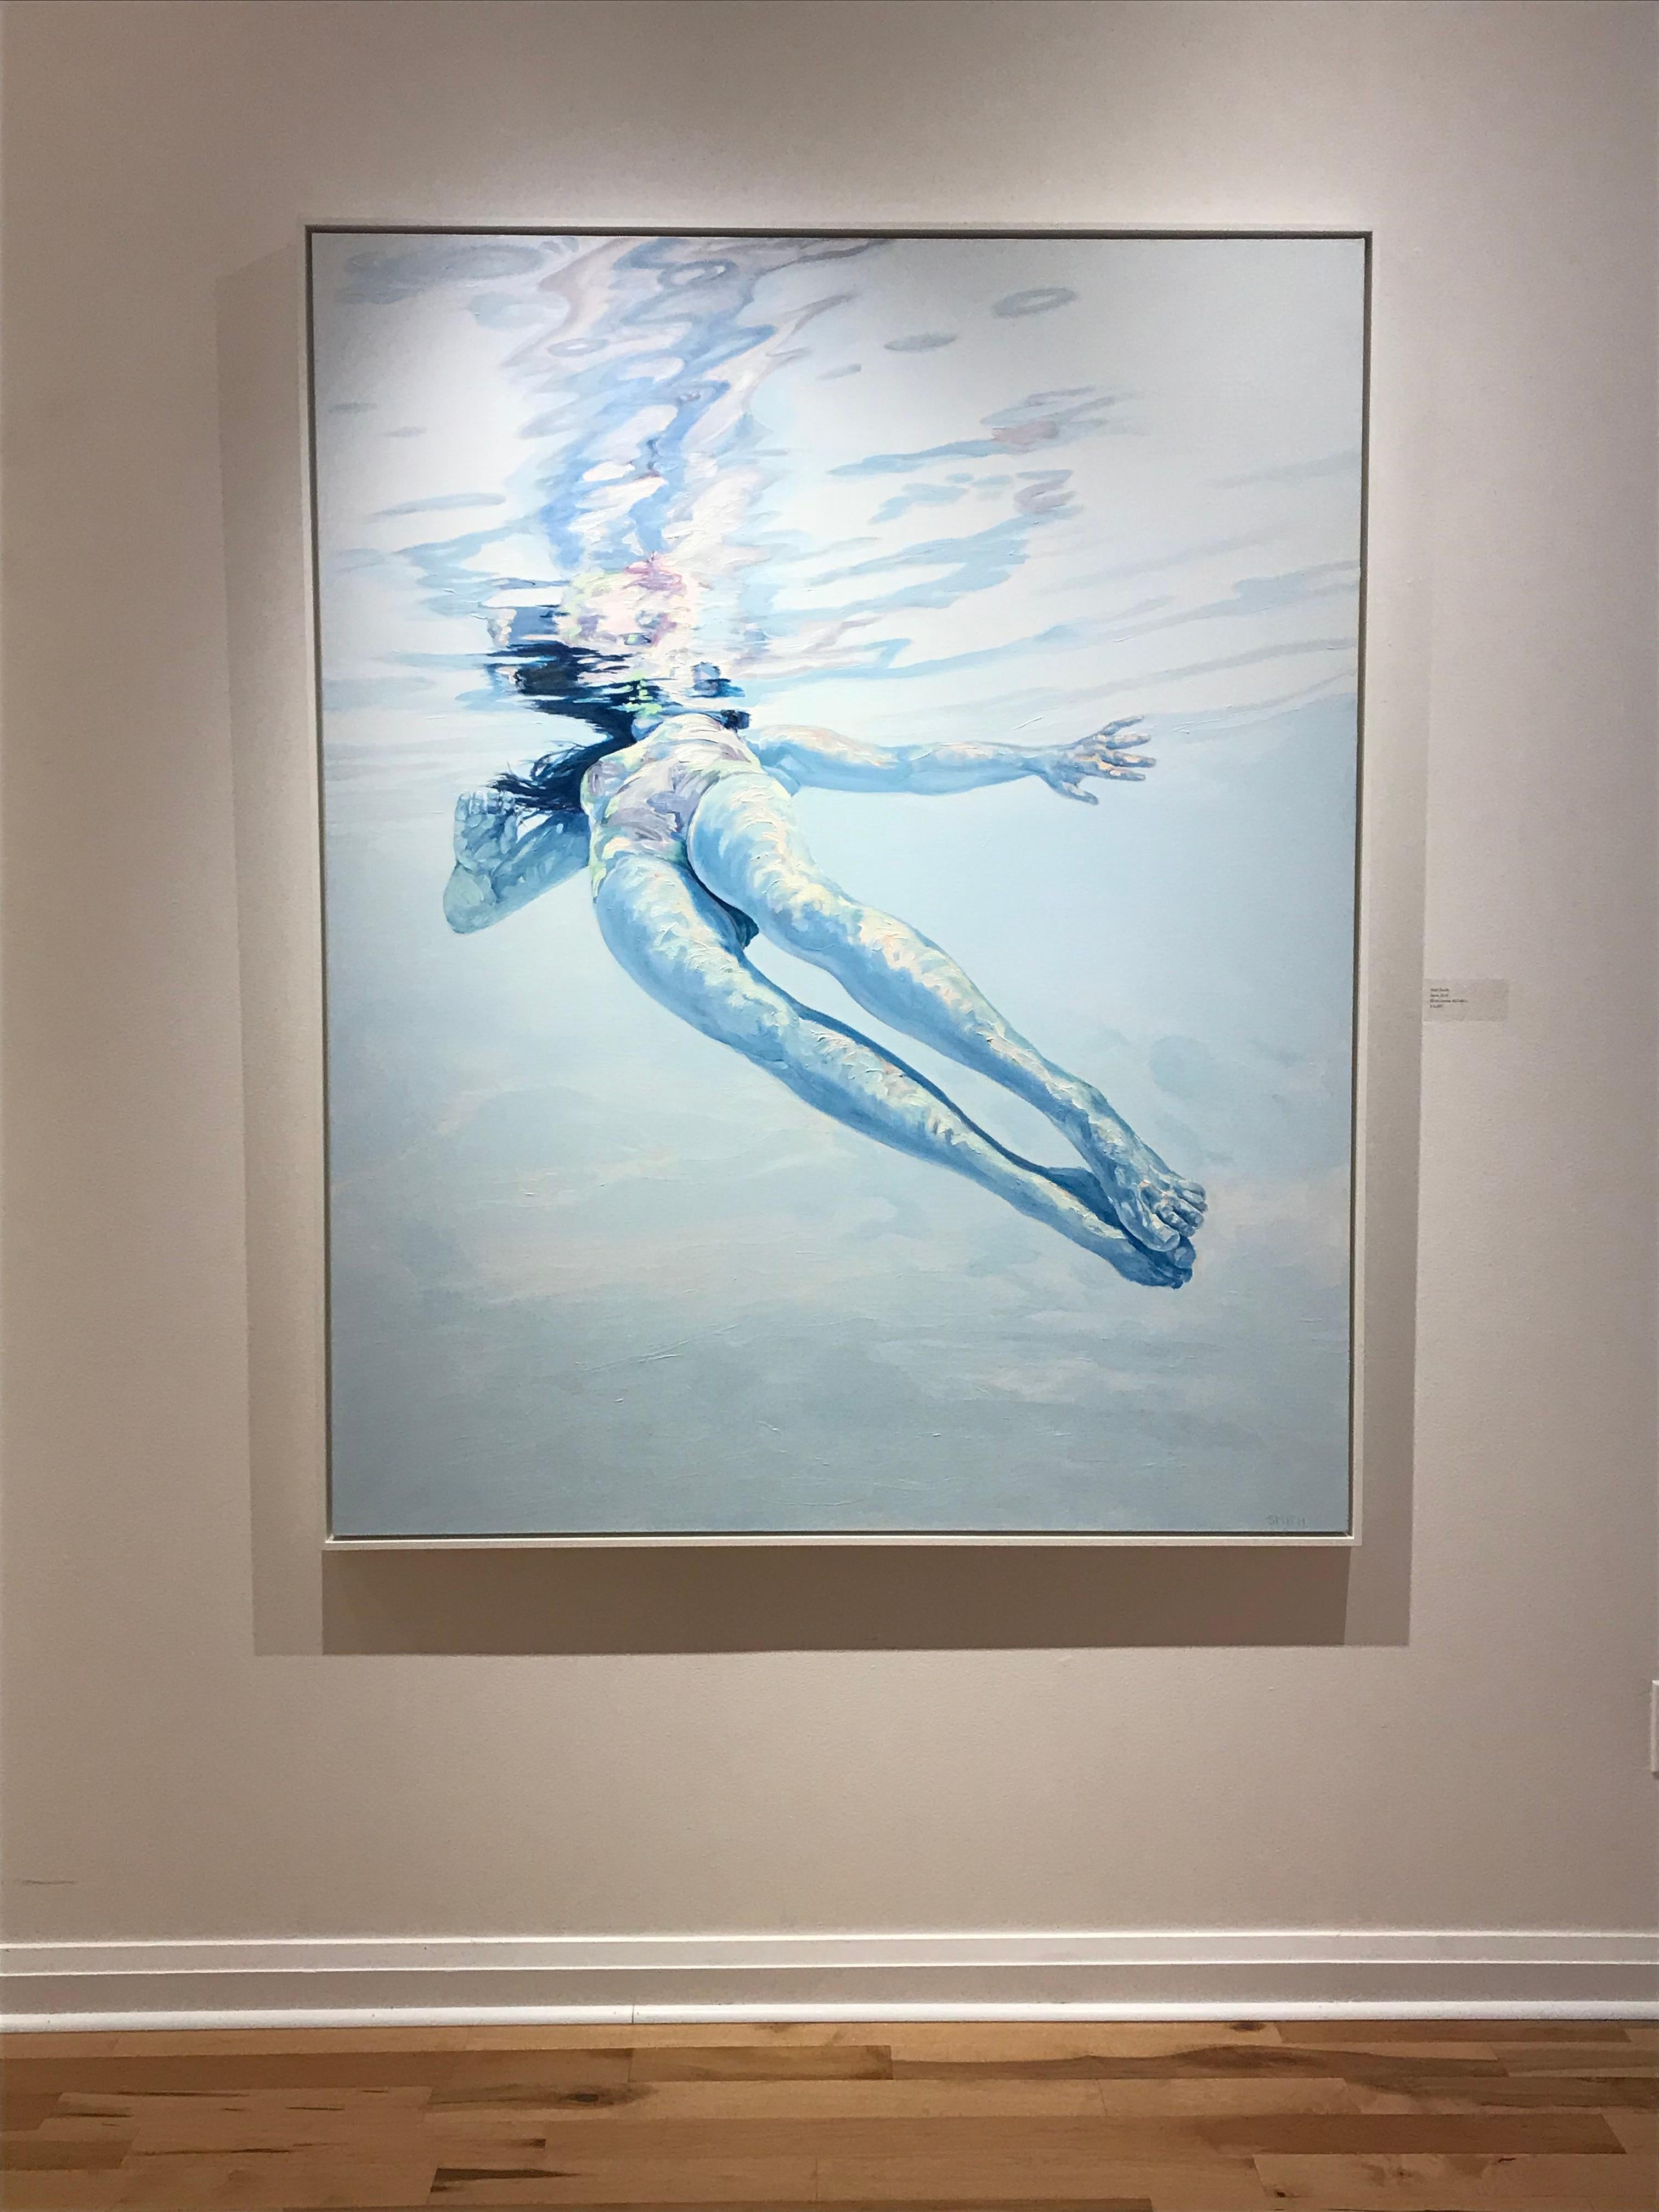 Azure, Vicki Smith, Oil on Canvas, Framed in White - Painting by Vicki Smith 